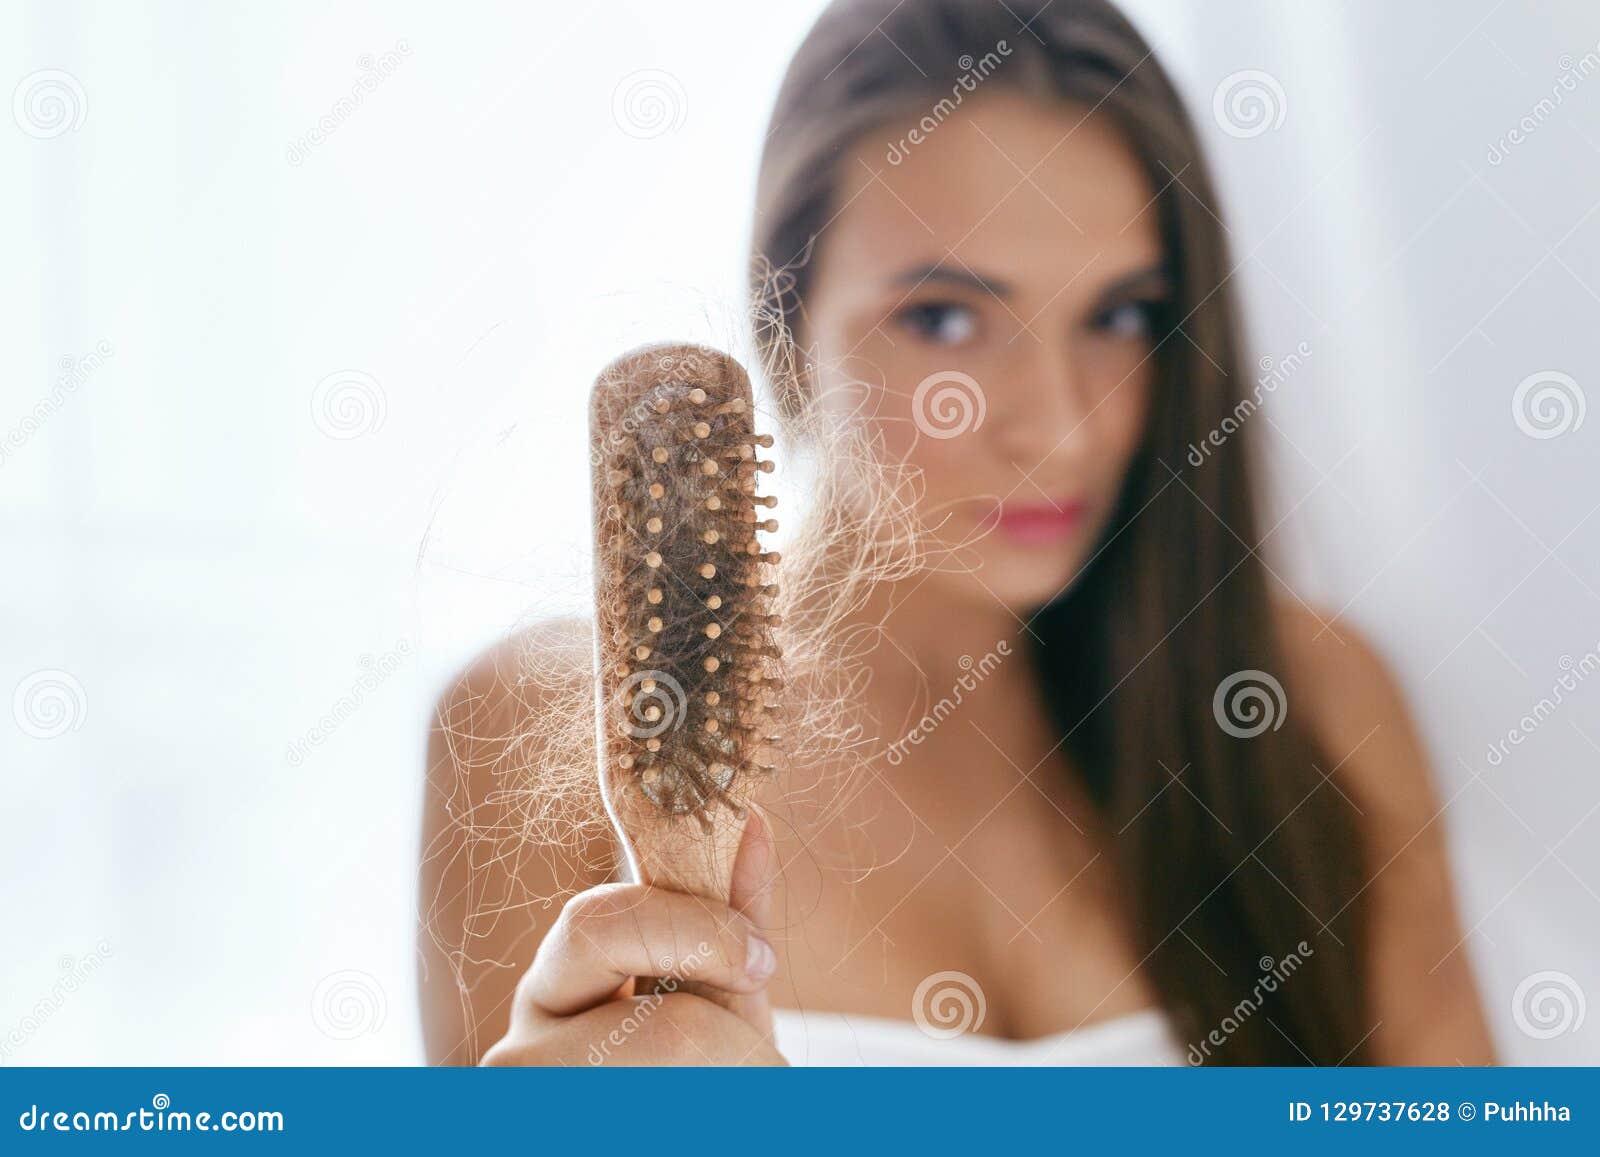 hair loss. upset woman holding brush with hair